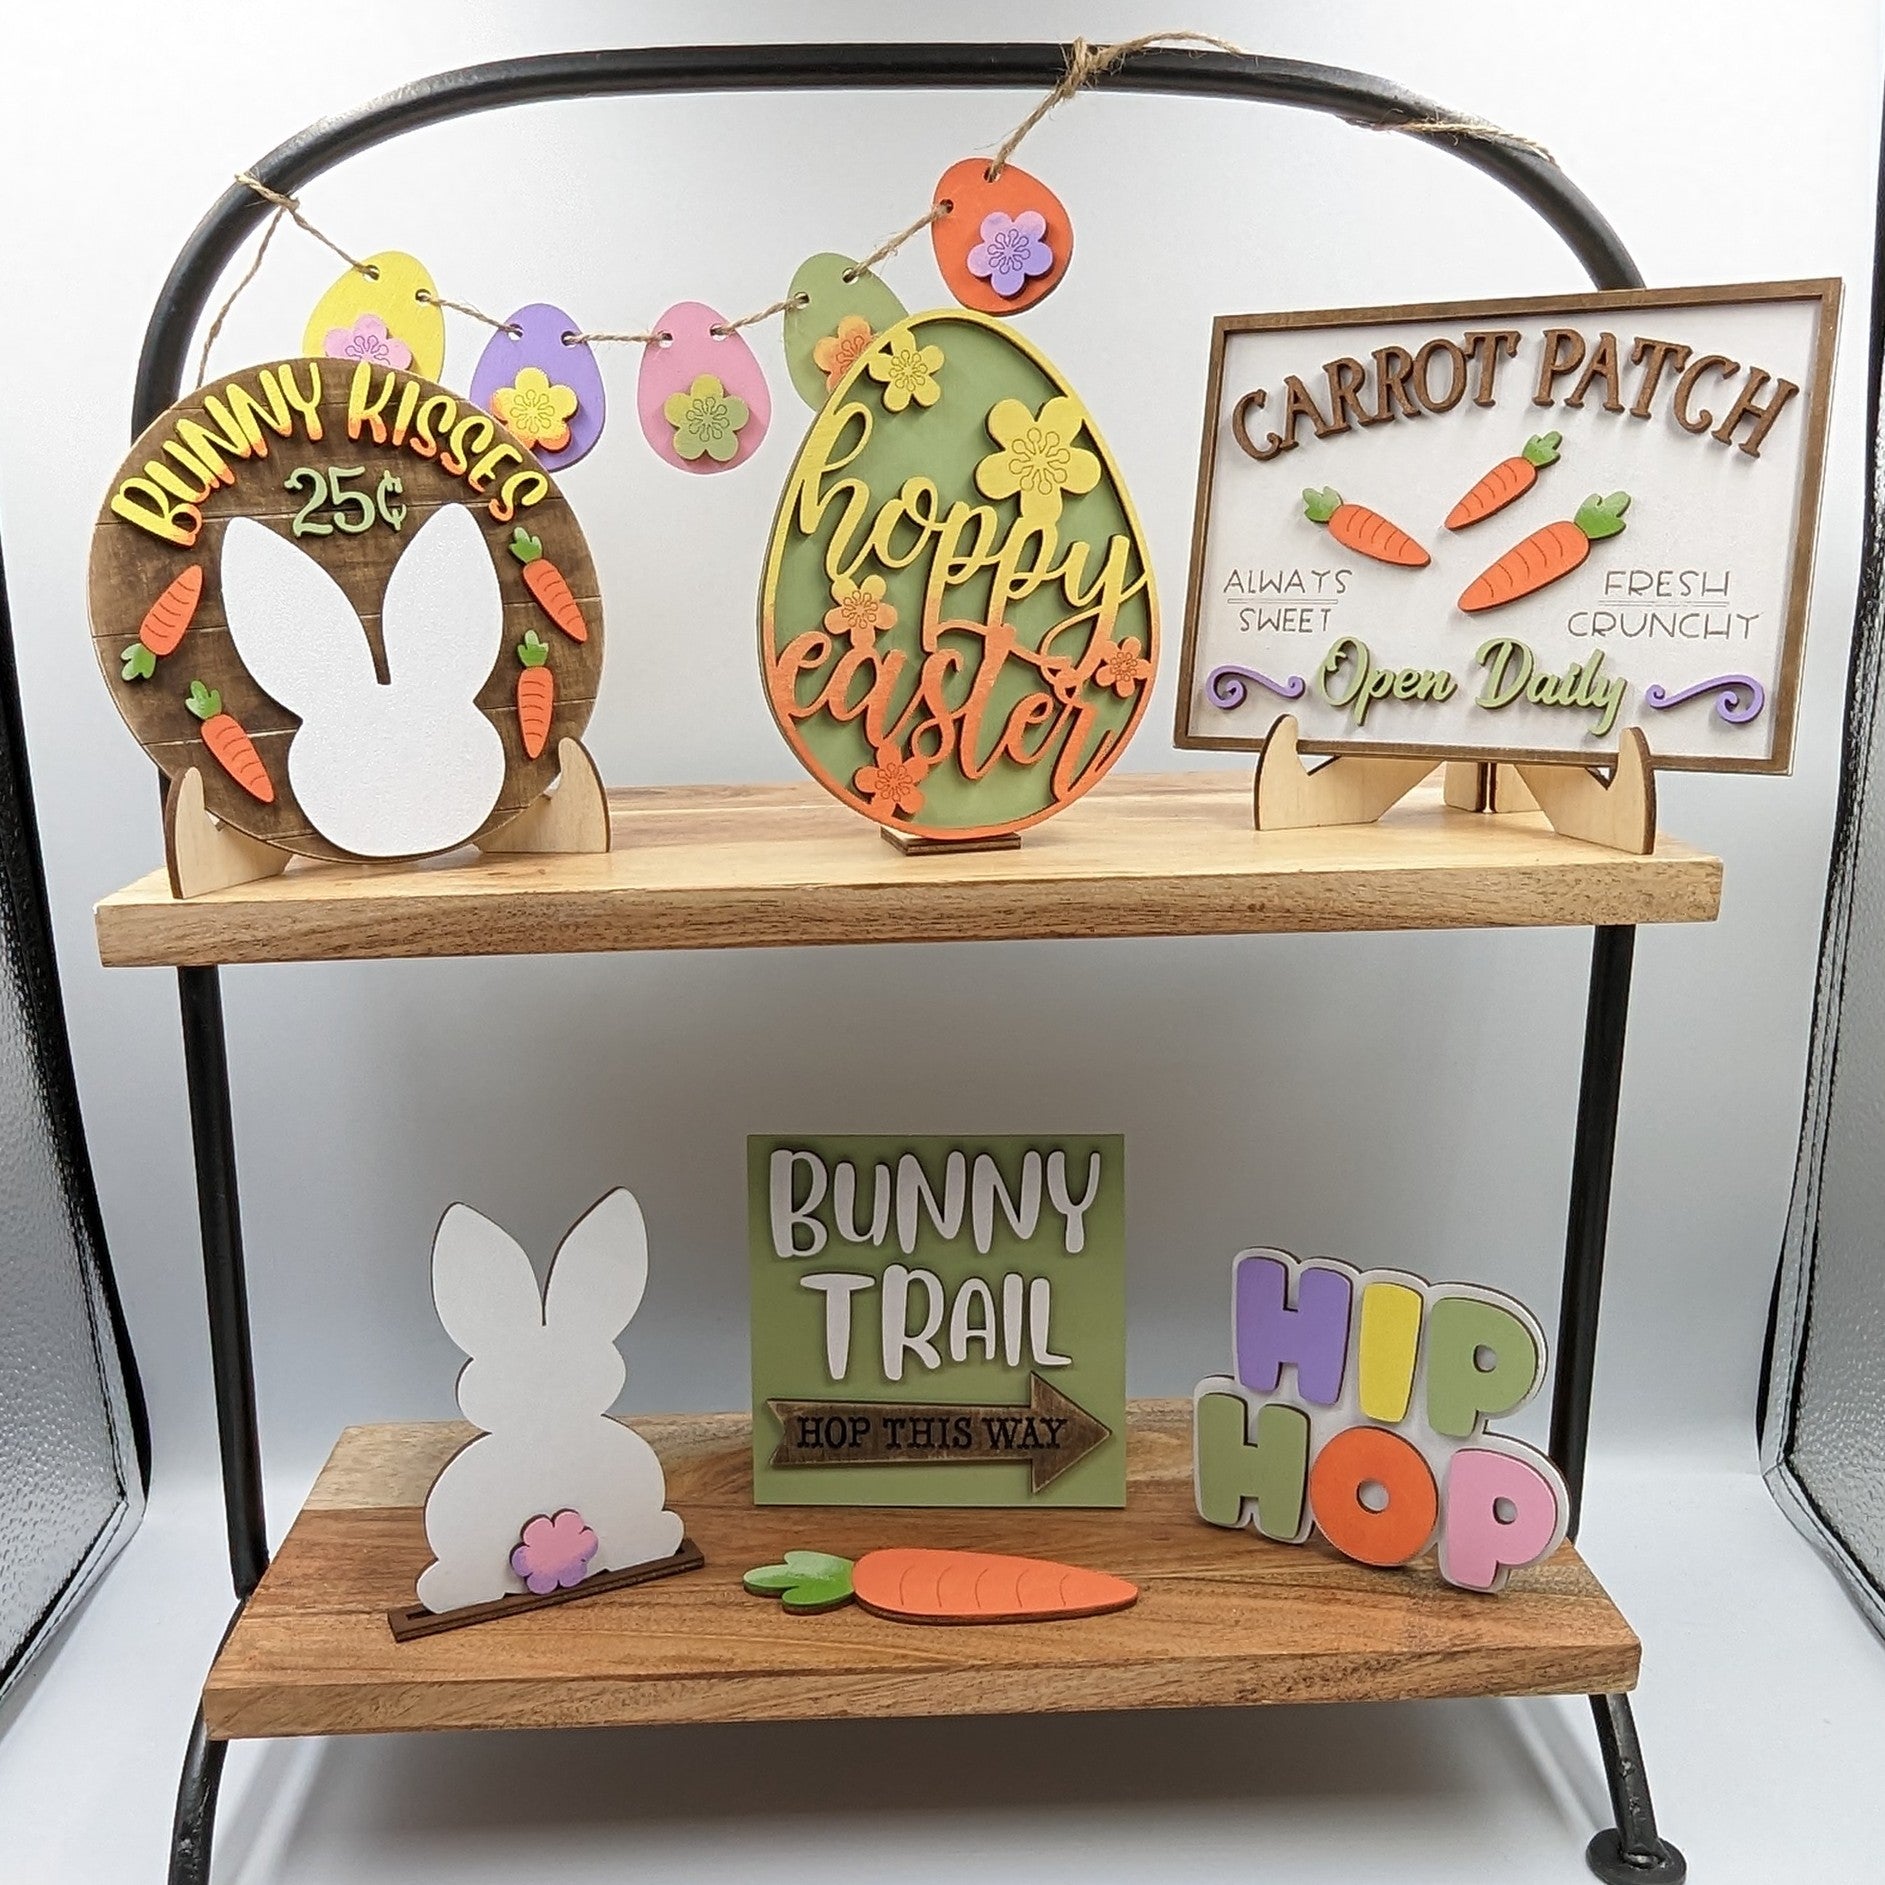 "Easter decor set with wooden signs and bunny decor, perfect for tiered trays or mantle displays.